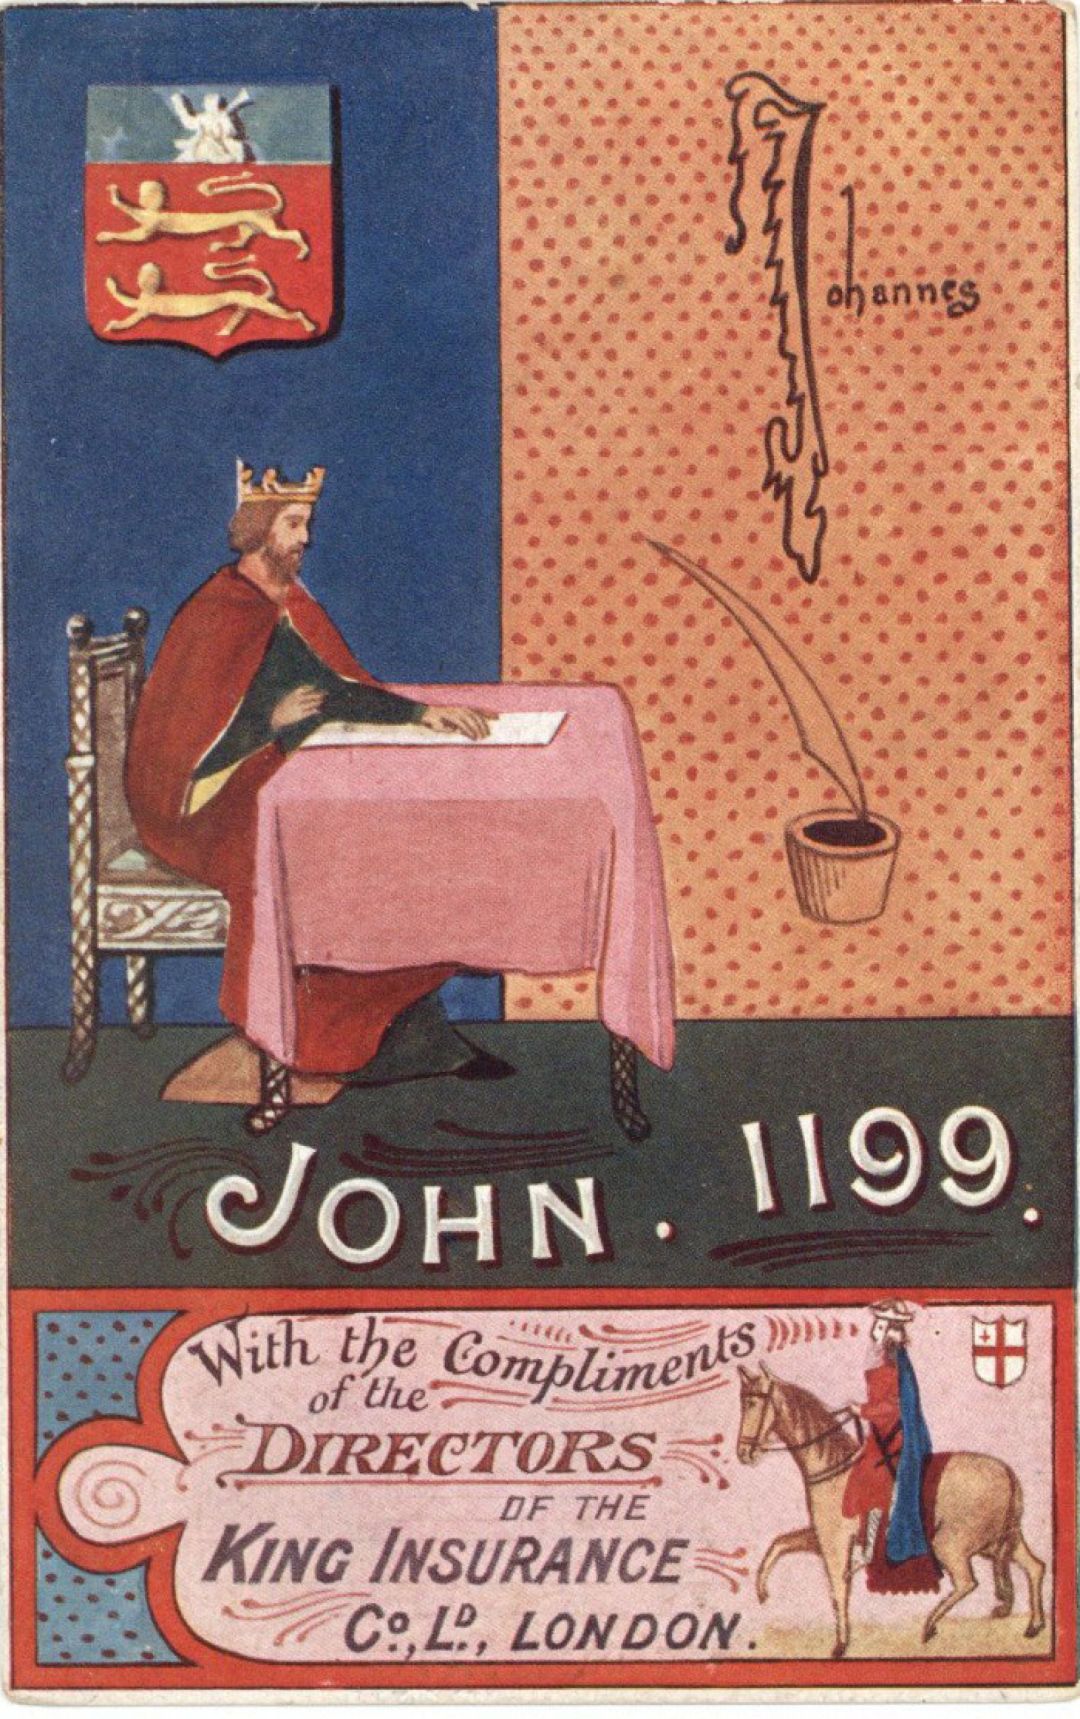 Post Card Ad for King Insurance Co. Ltd. dated 1199 -  Insurance